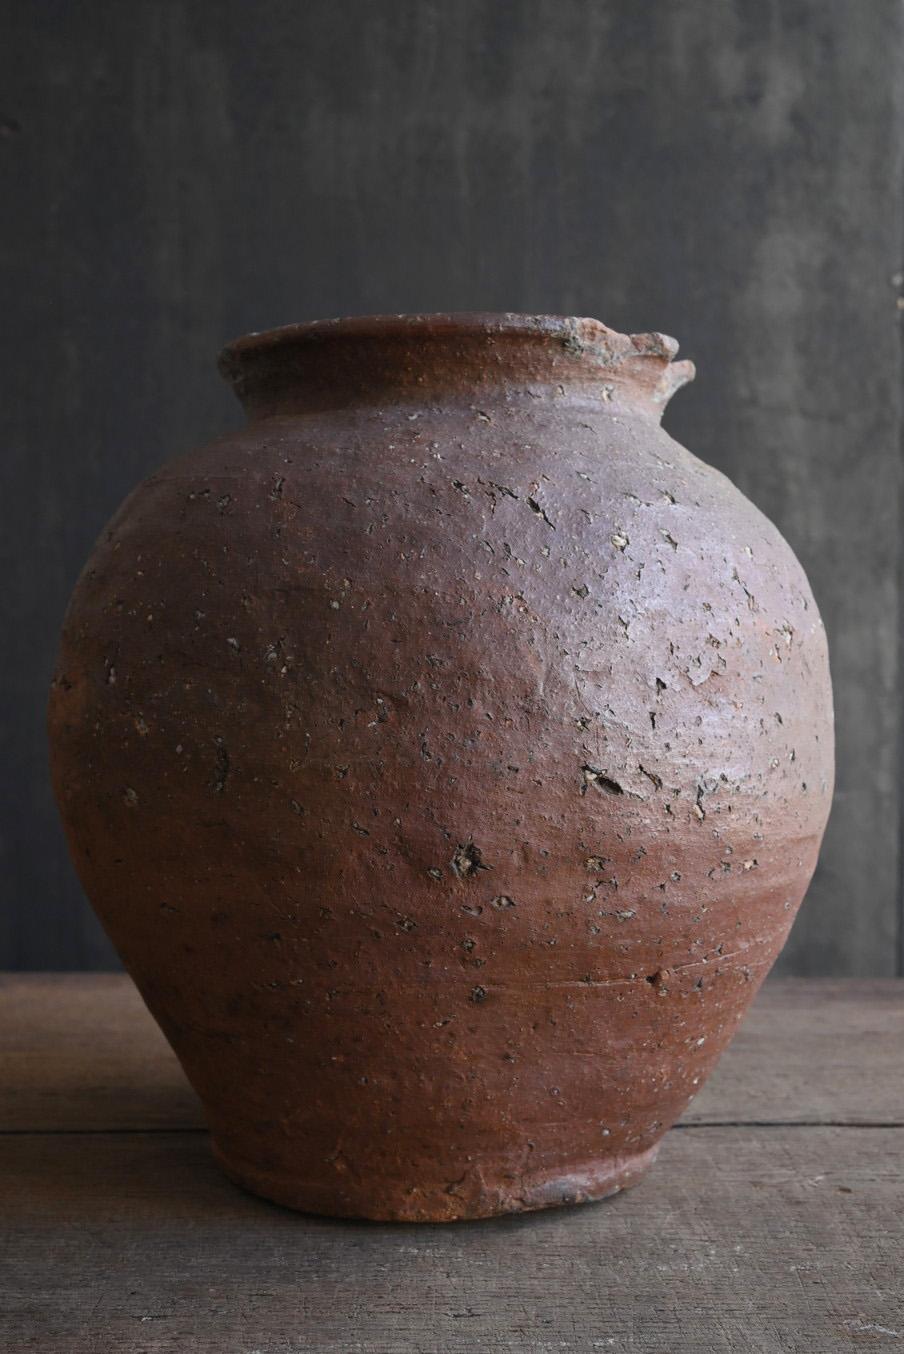 I would like to introduce an attractive pot that gives you a sense of wabi-sabi.
It is 